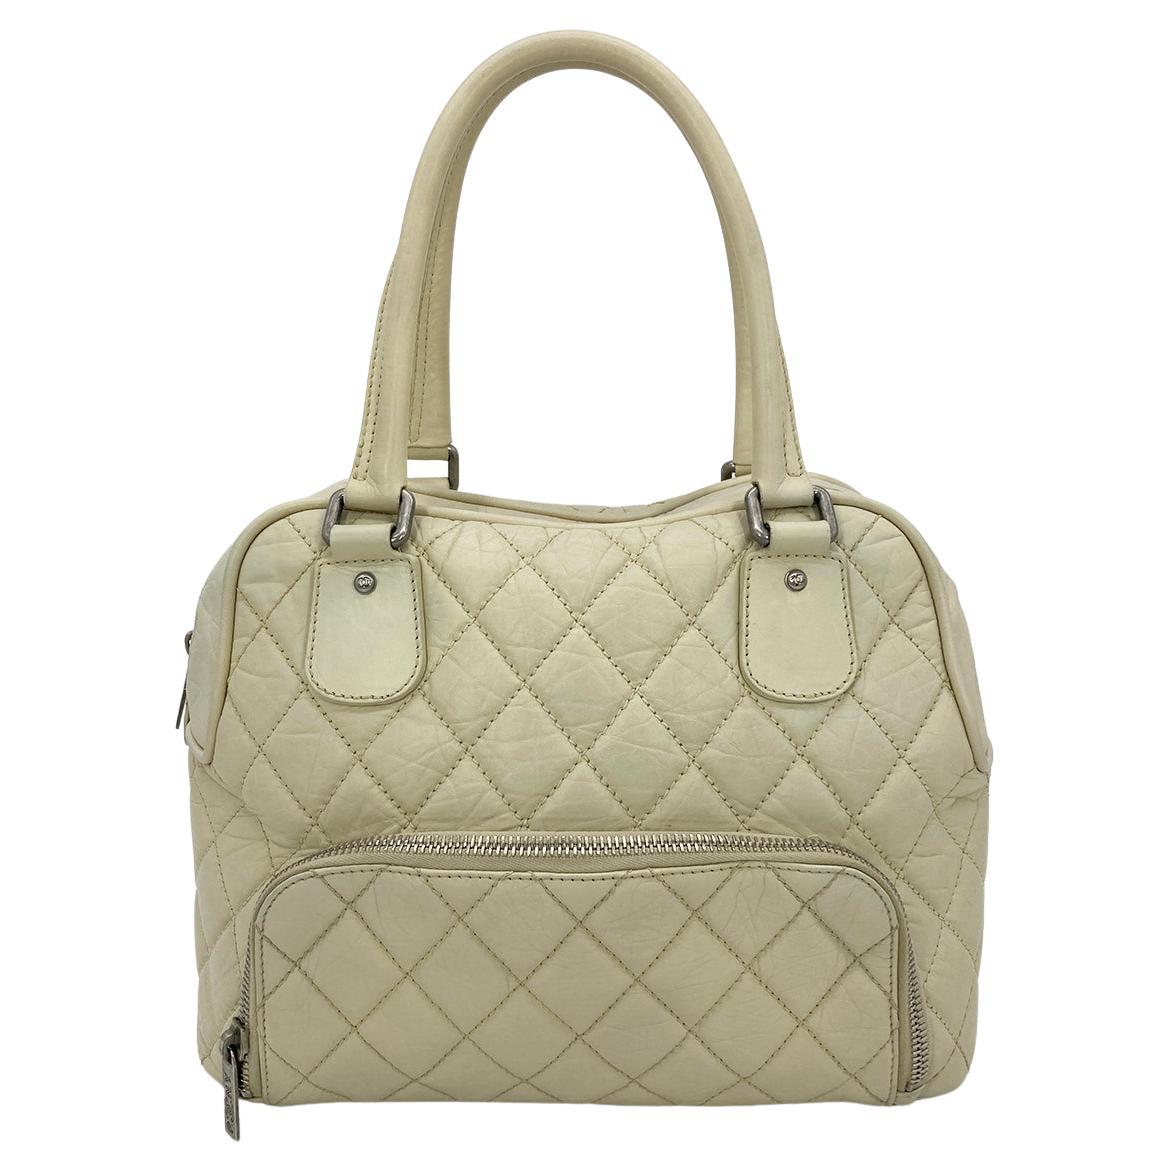 Chanel Paris New York Cream Distressed Bowling Tote For Sale